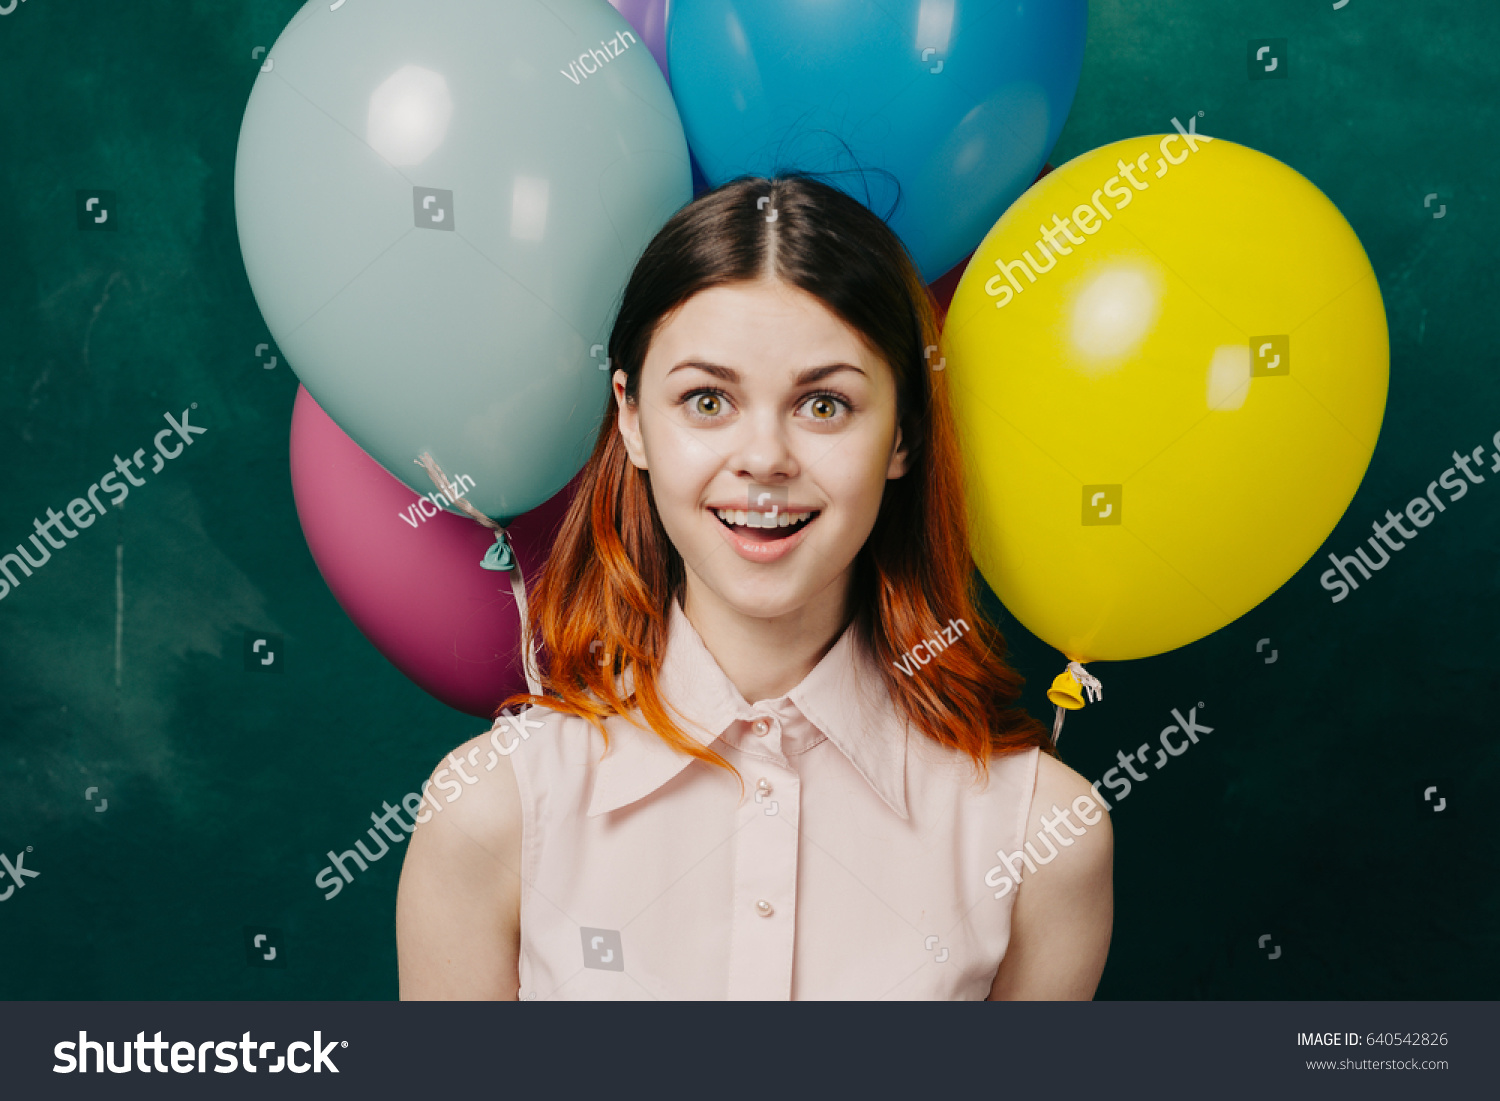 Joyful woman with balloons, the girl is happy, the girl is smiling with joy, joy and happiness #640542826